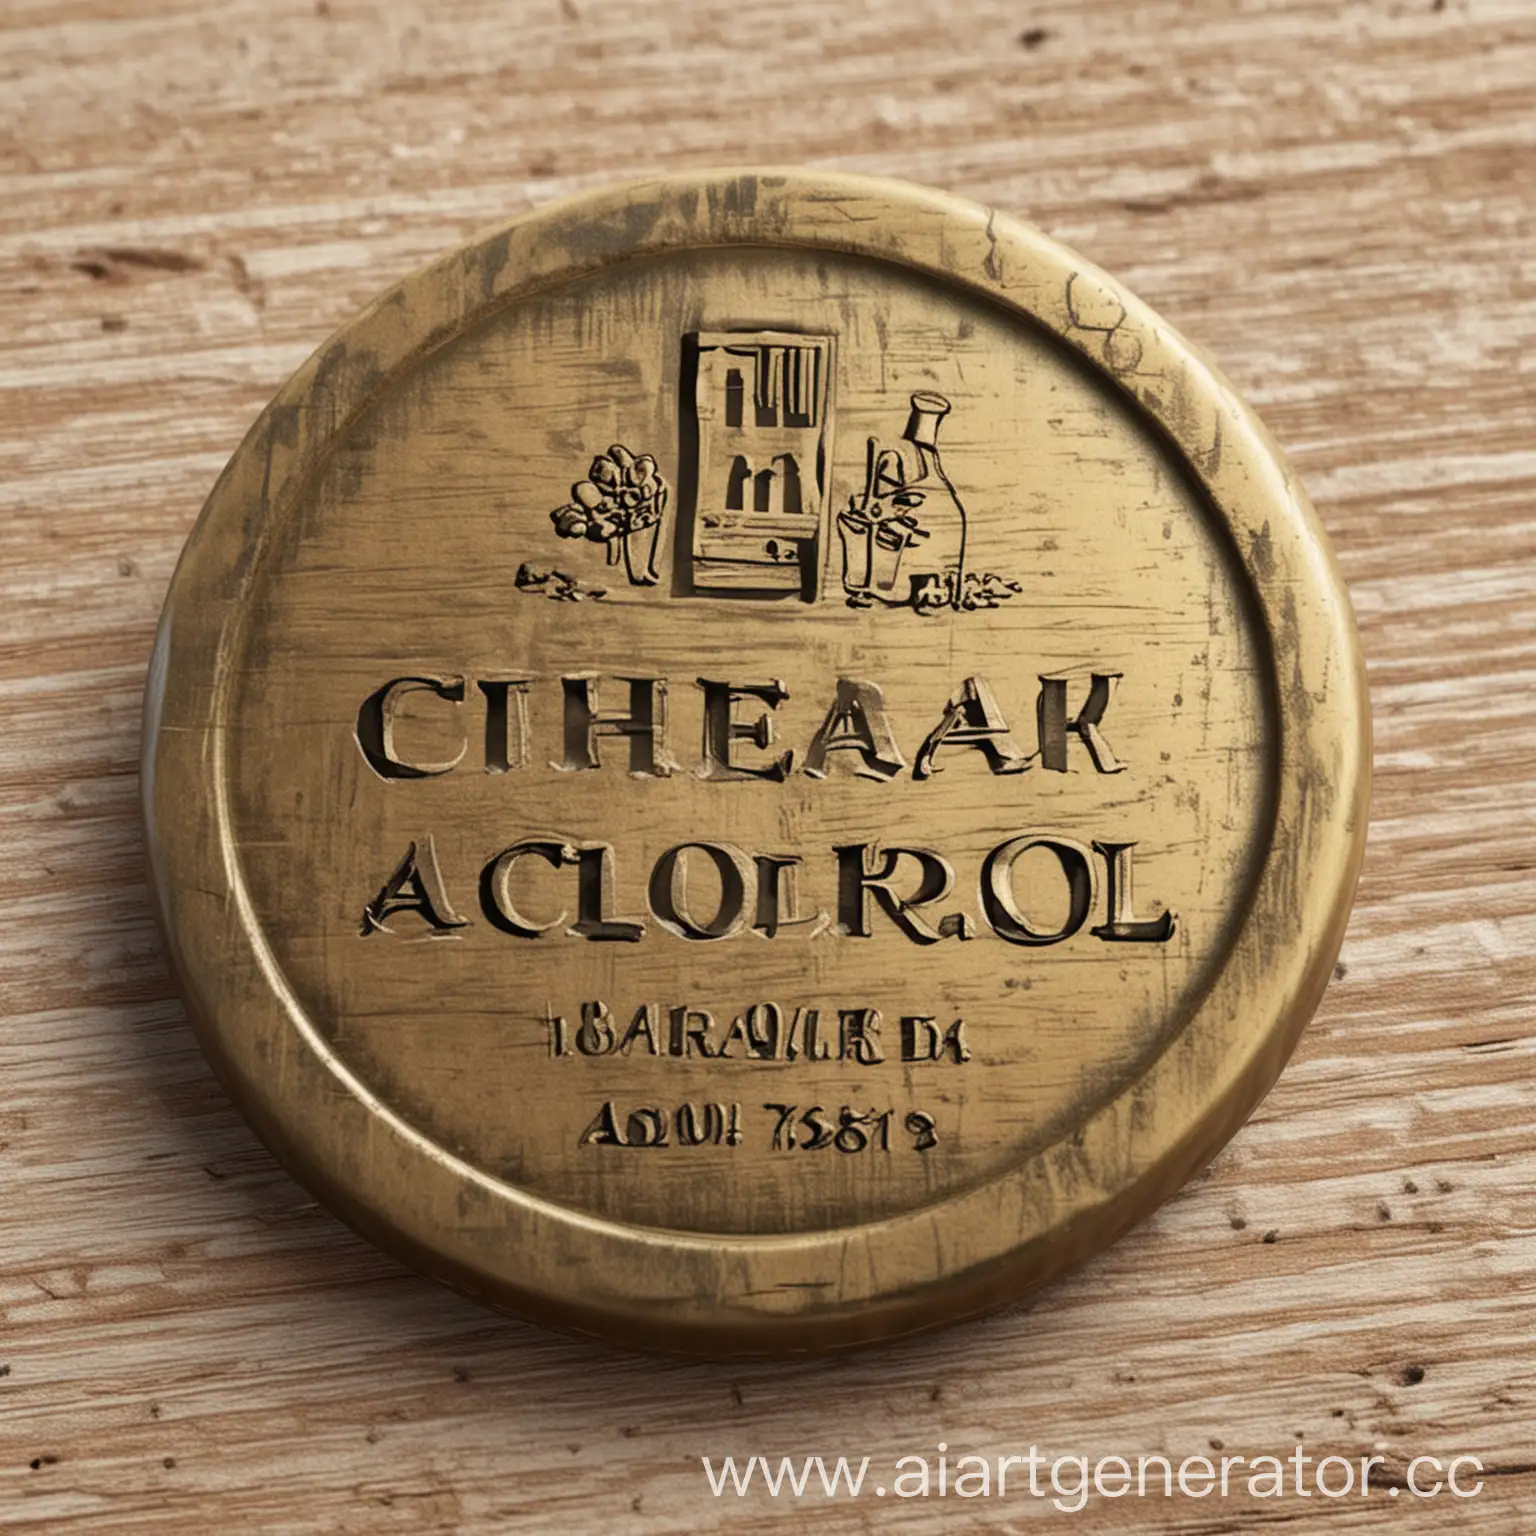 HighResolution-Round-Button-with-BaltTon-Cheap-Alcohol-Coin-Image